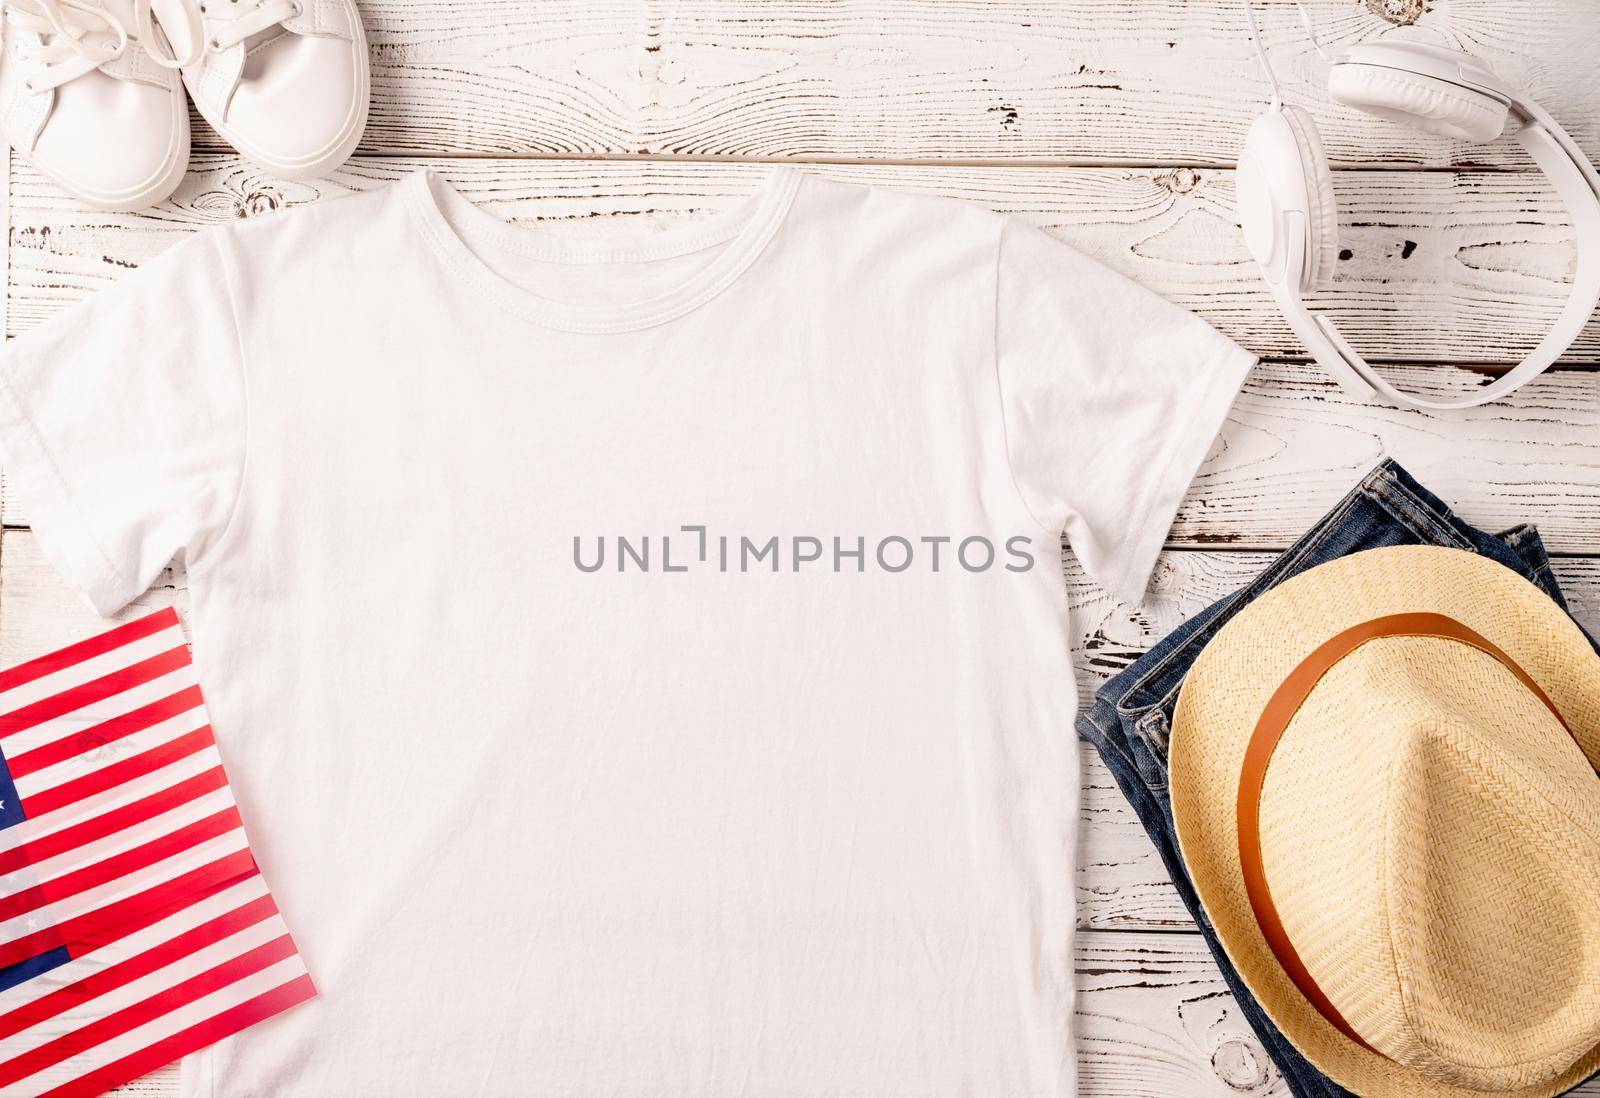 Mockup design white t shirt for logo, top view on white wooden background with US flag and decoration by Desperada